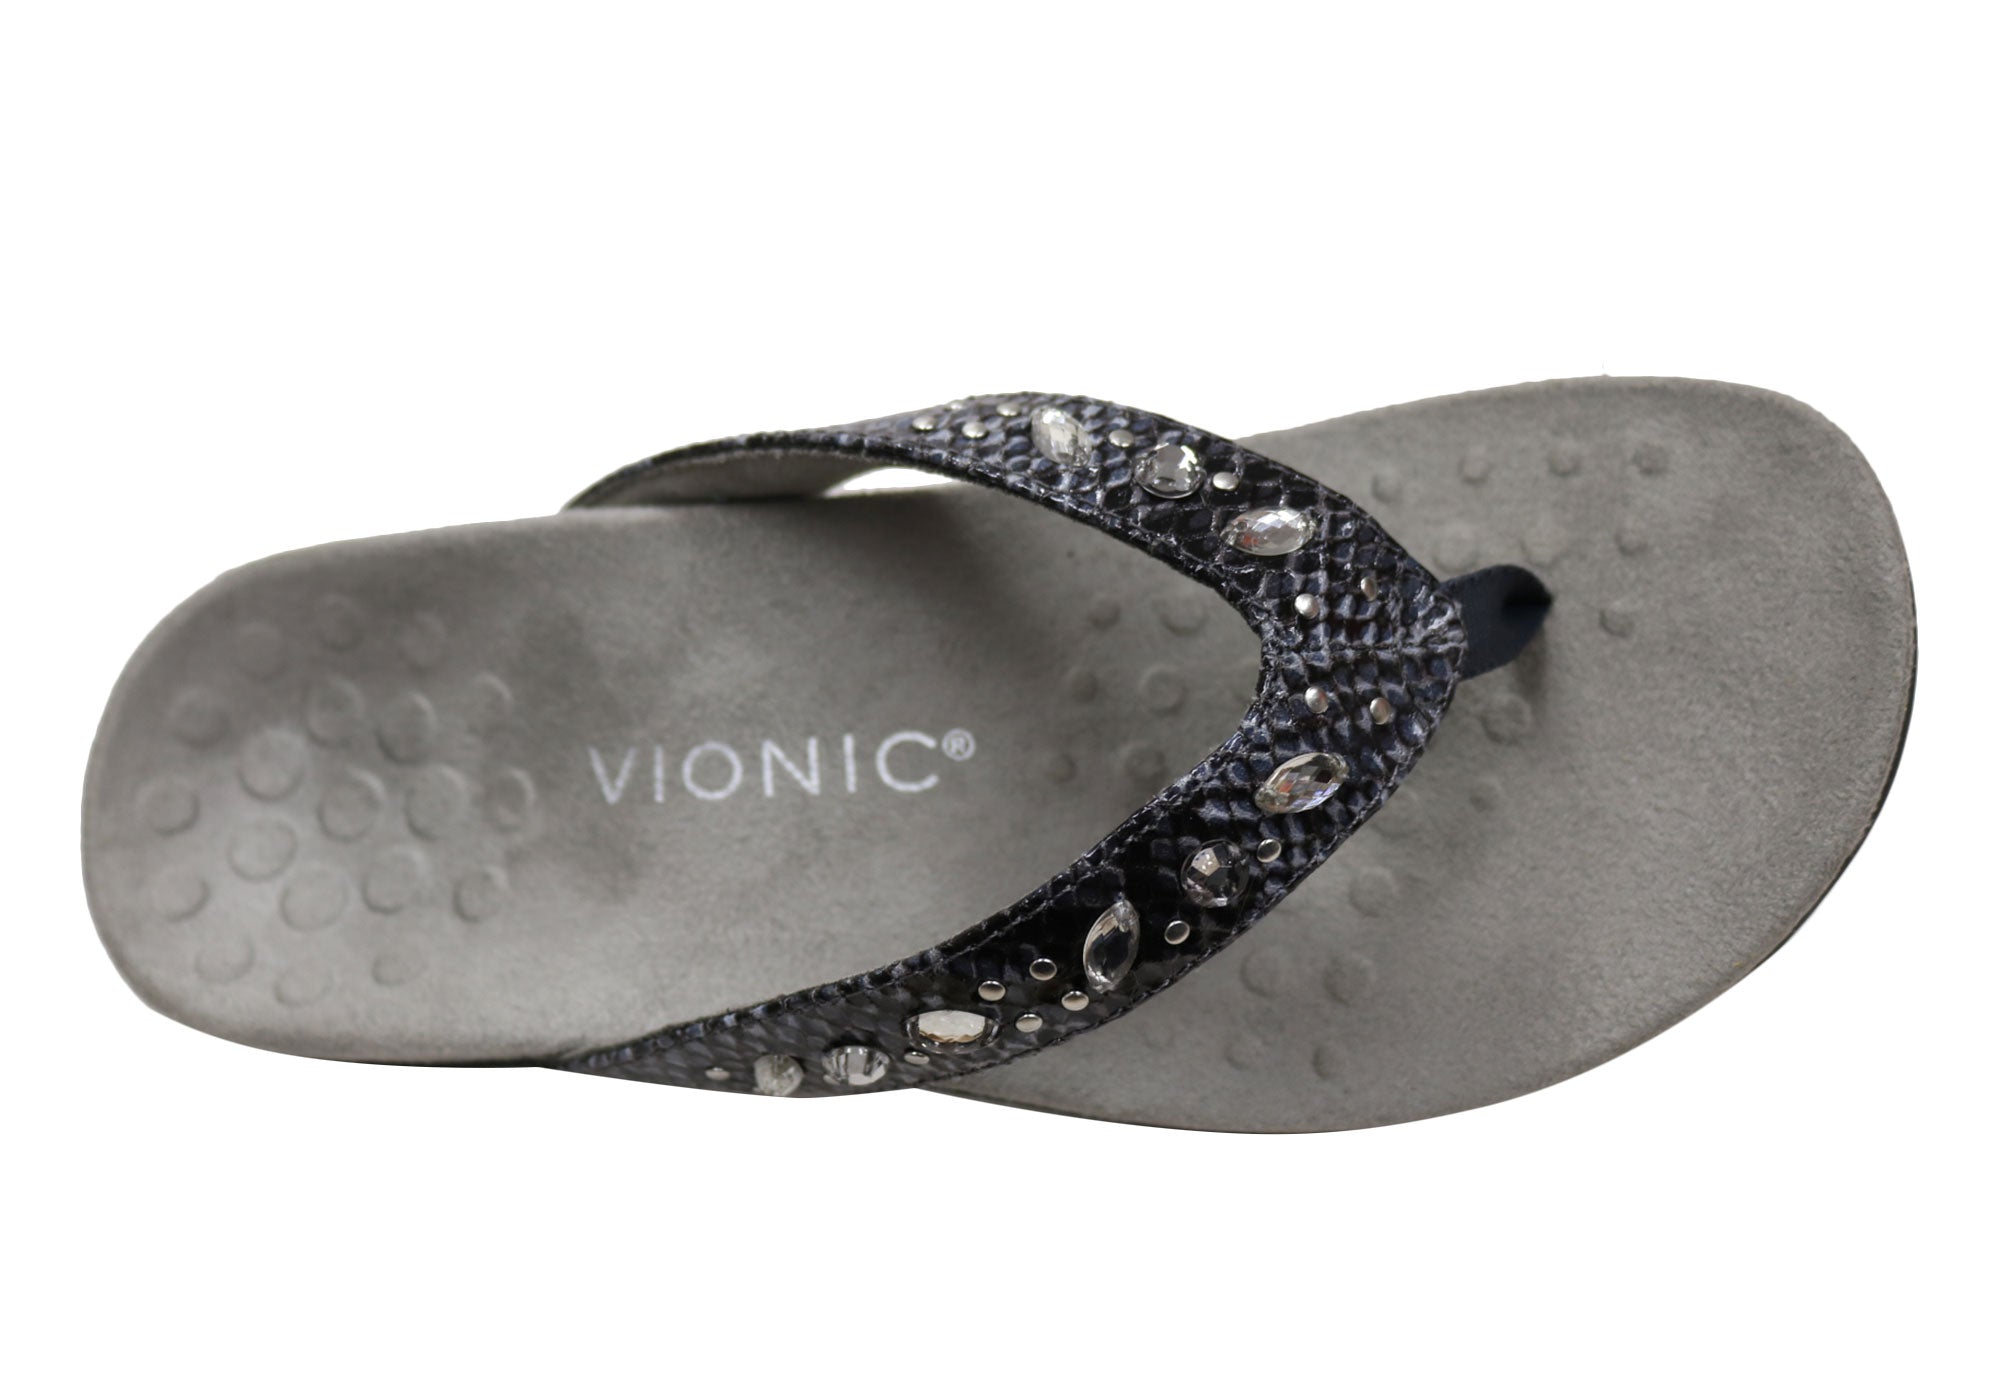 Vionic Womens Comfortable Supportive Lucia Toe Post Sandals Thongs